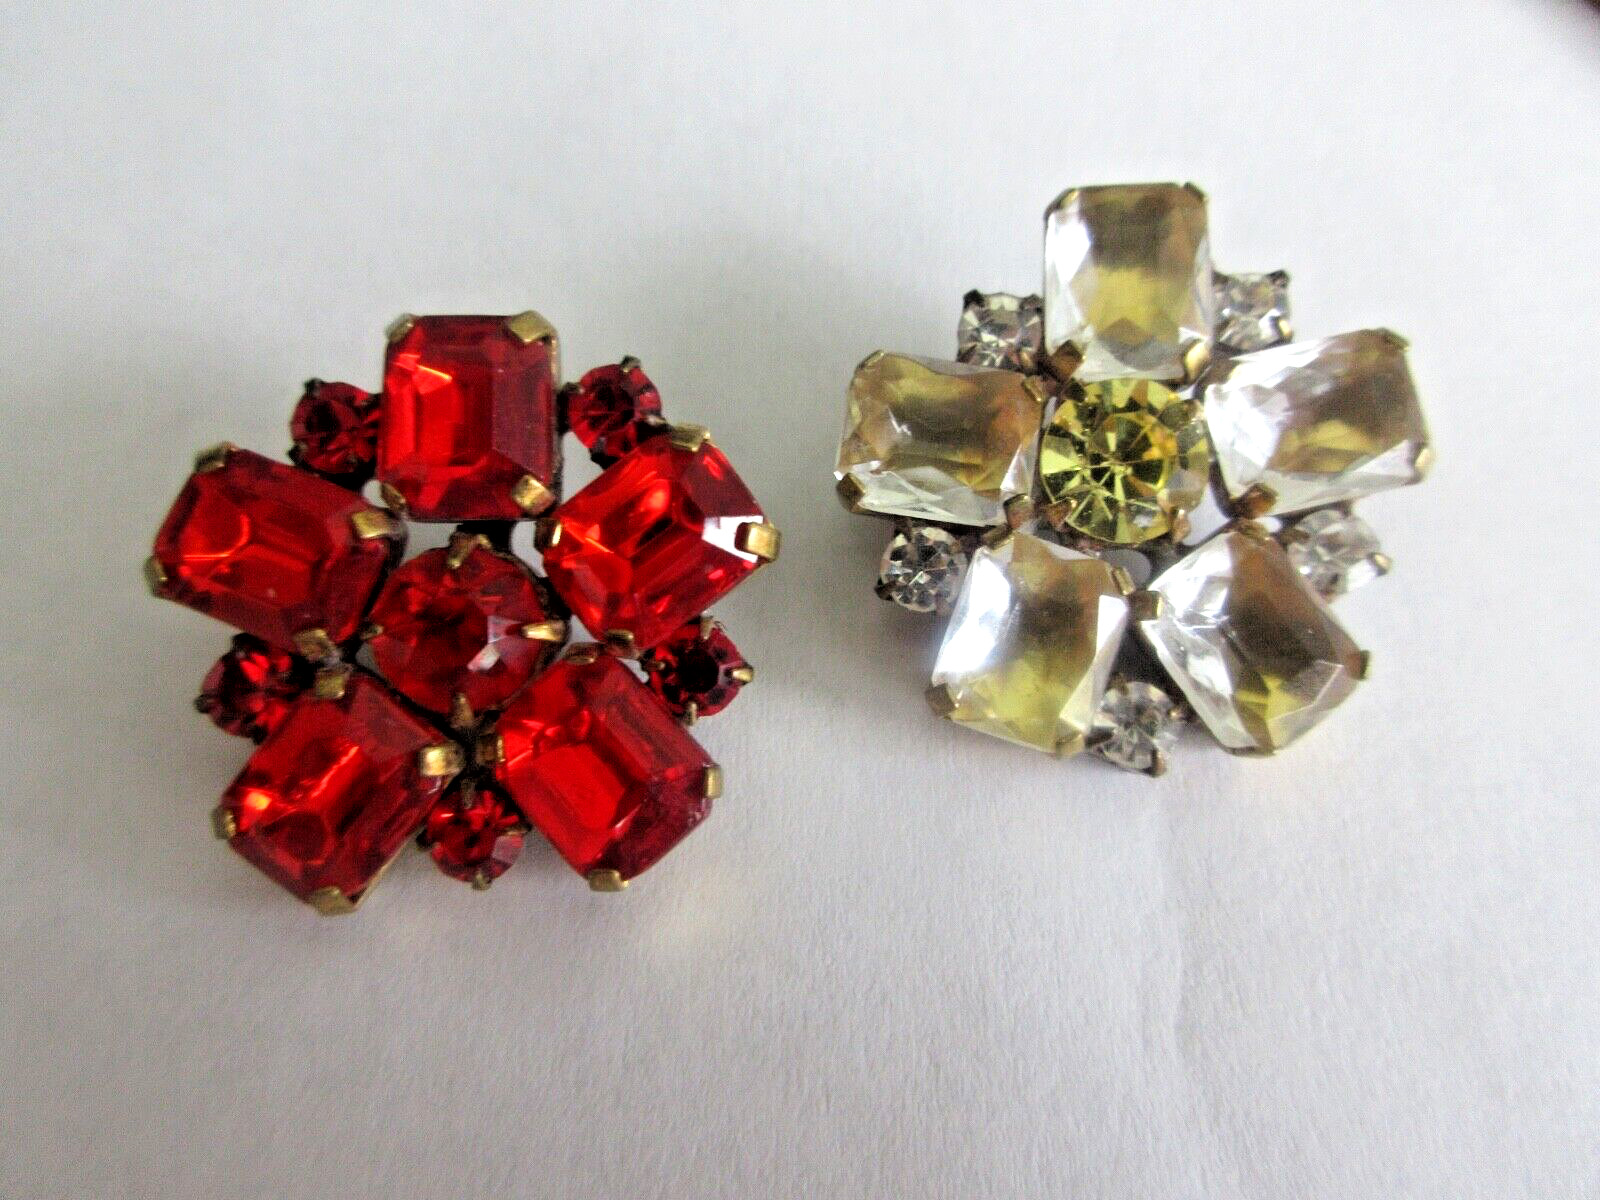 OUTSTANDING  2  Czech Vintage Glass Rhinestone Buttons   Ruby Red & Crystal